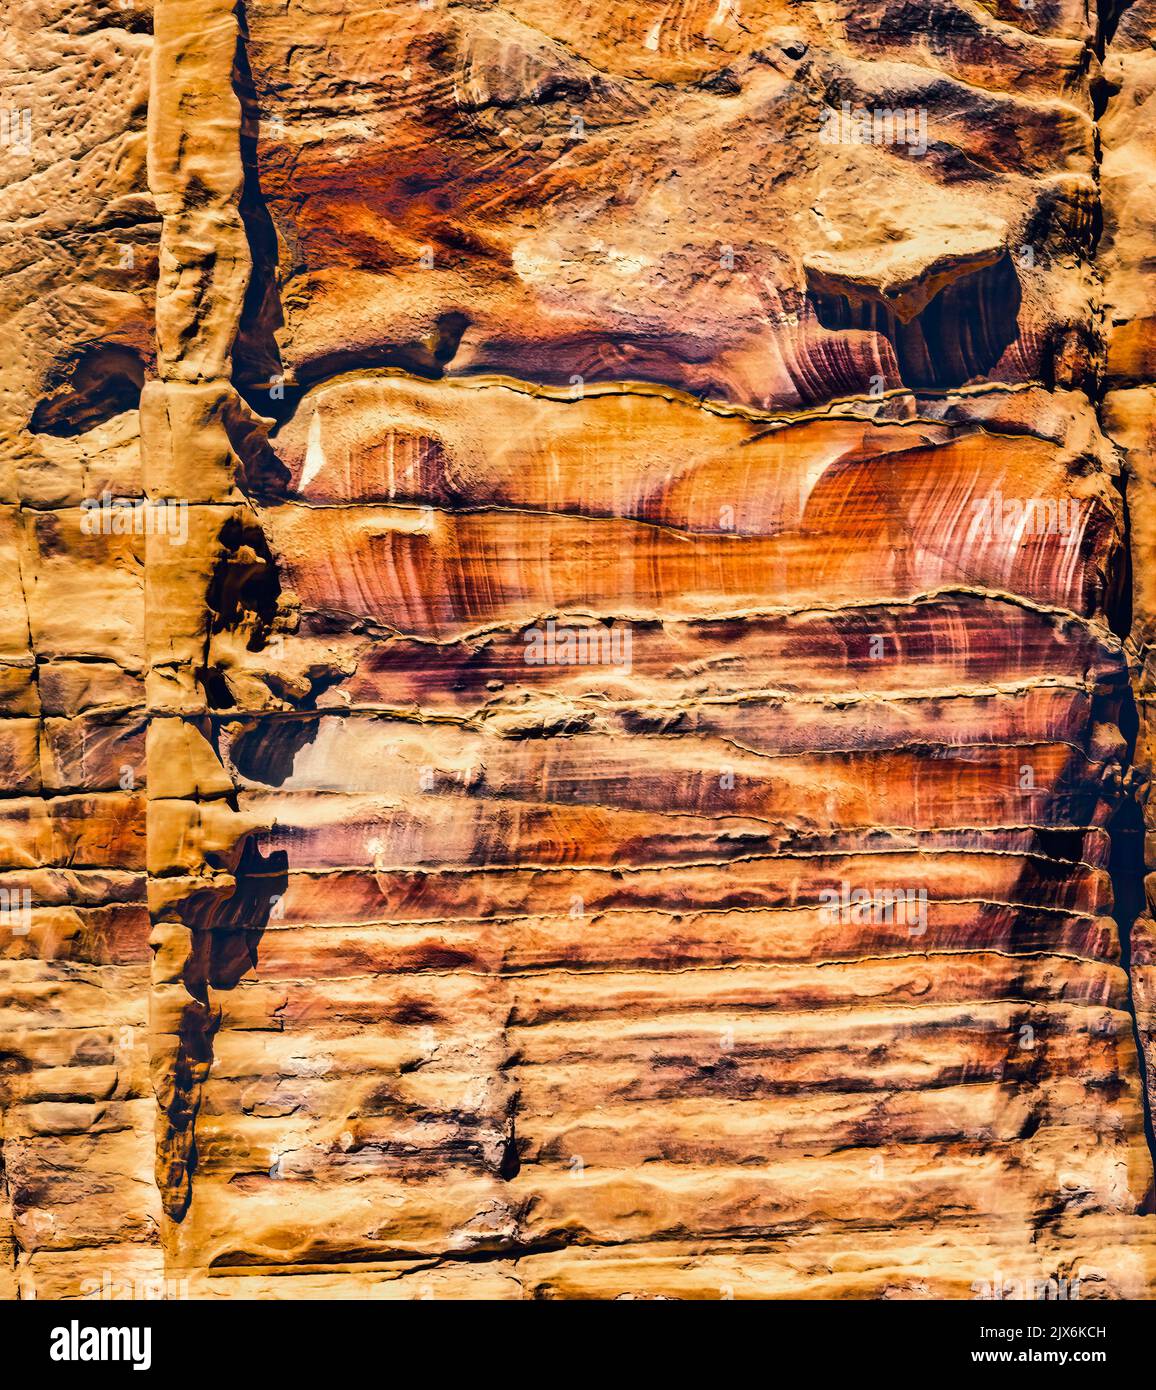 Colorful Rock Tombs Morning Street of Facades Petra Jordan Built by Nabataens in 200 BC to 400 AD Tombs have many abstracts close up Magnesium in rock Stock Photo